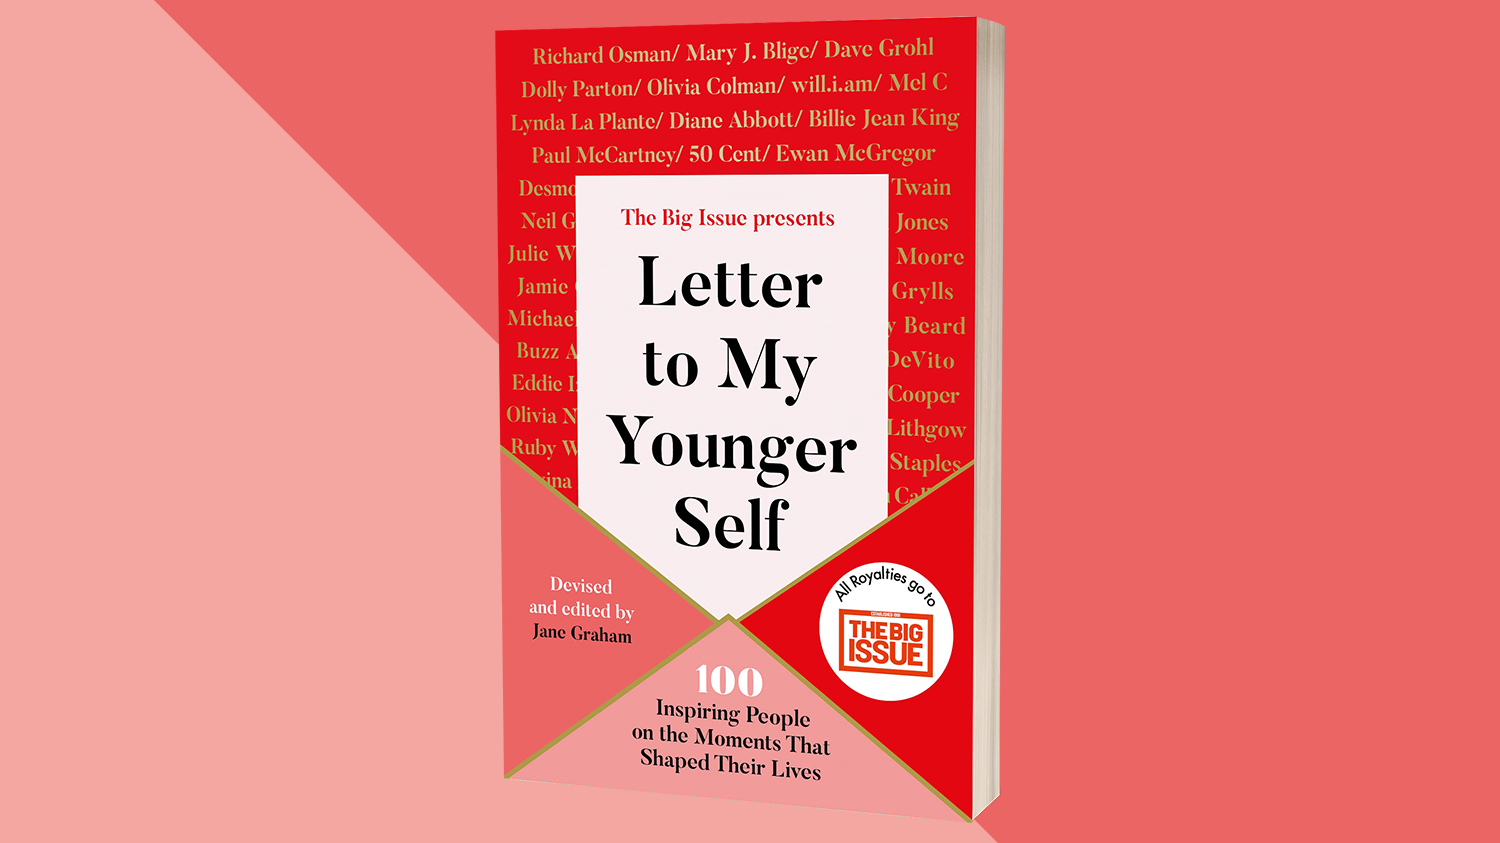 The Letter To My Younger Self paperback edition is out now.